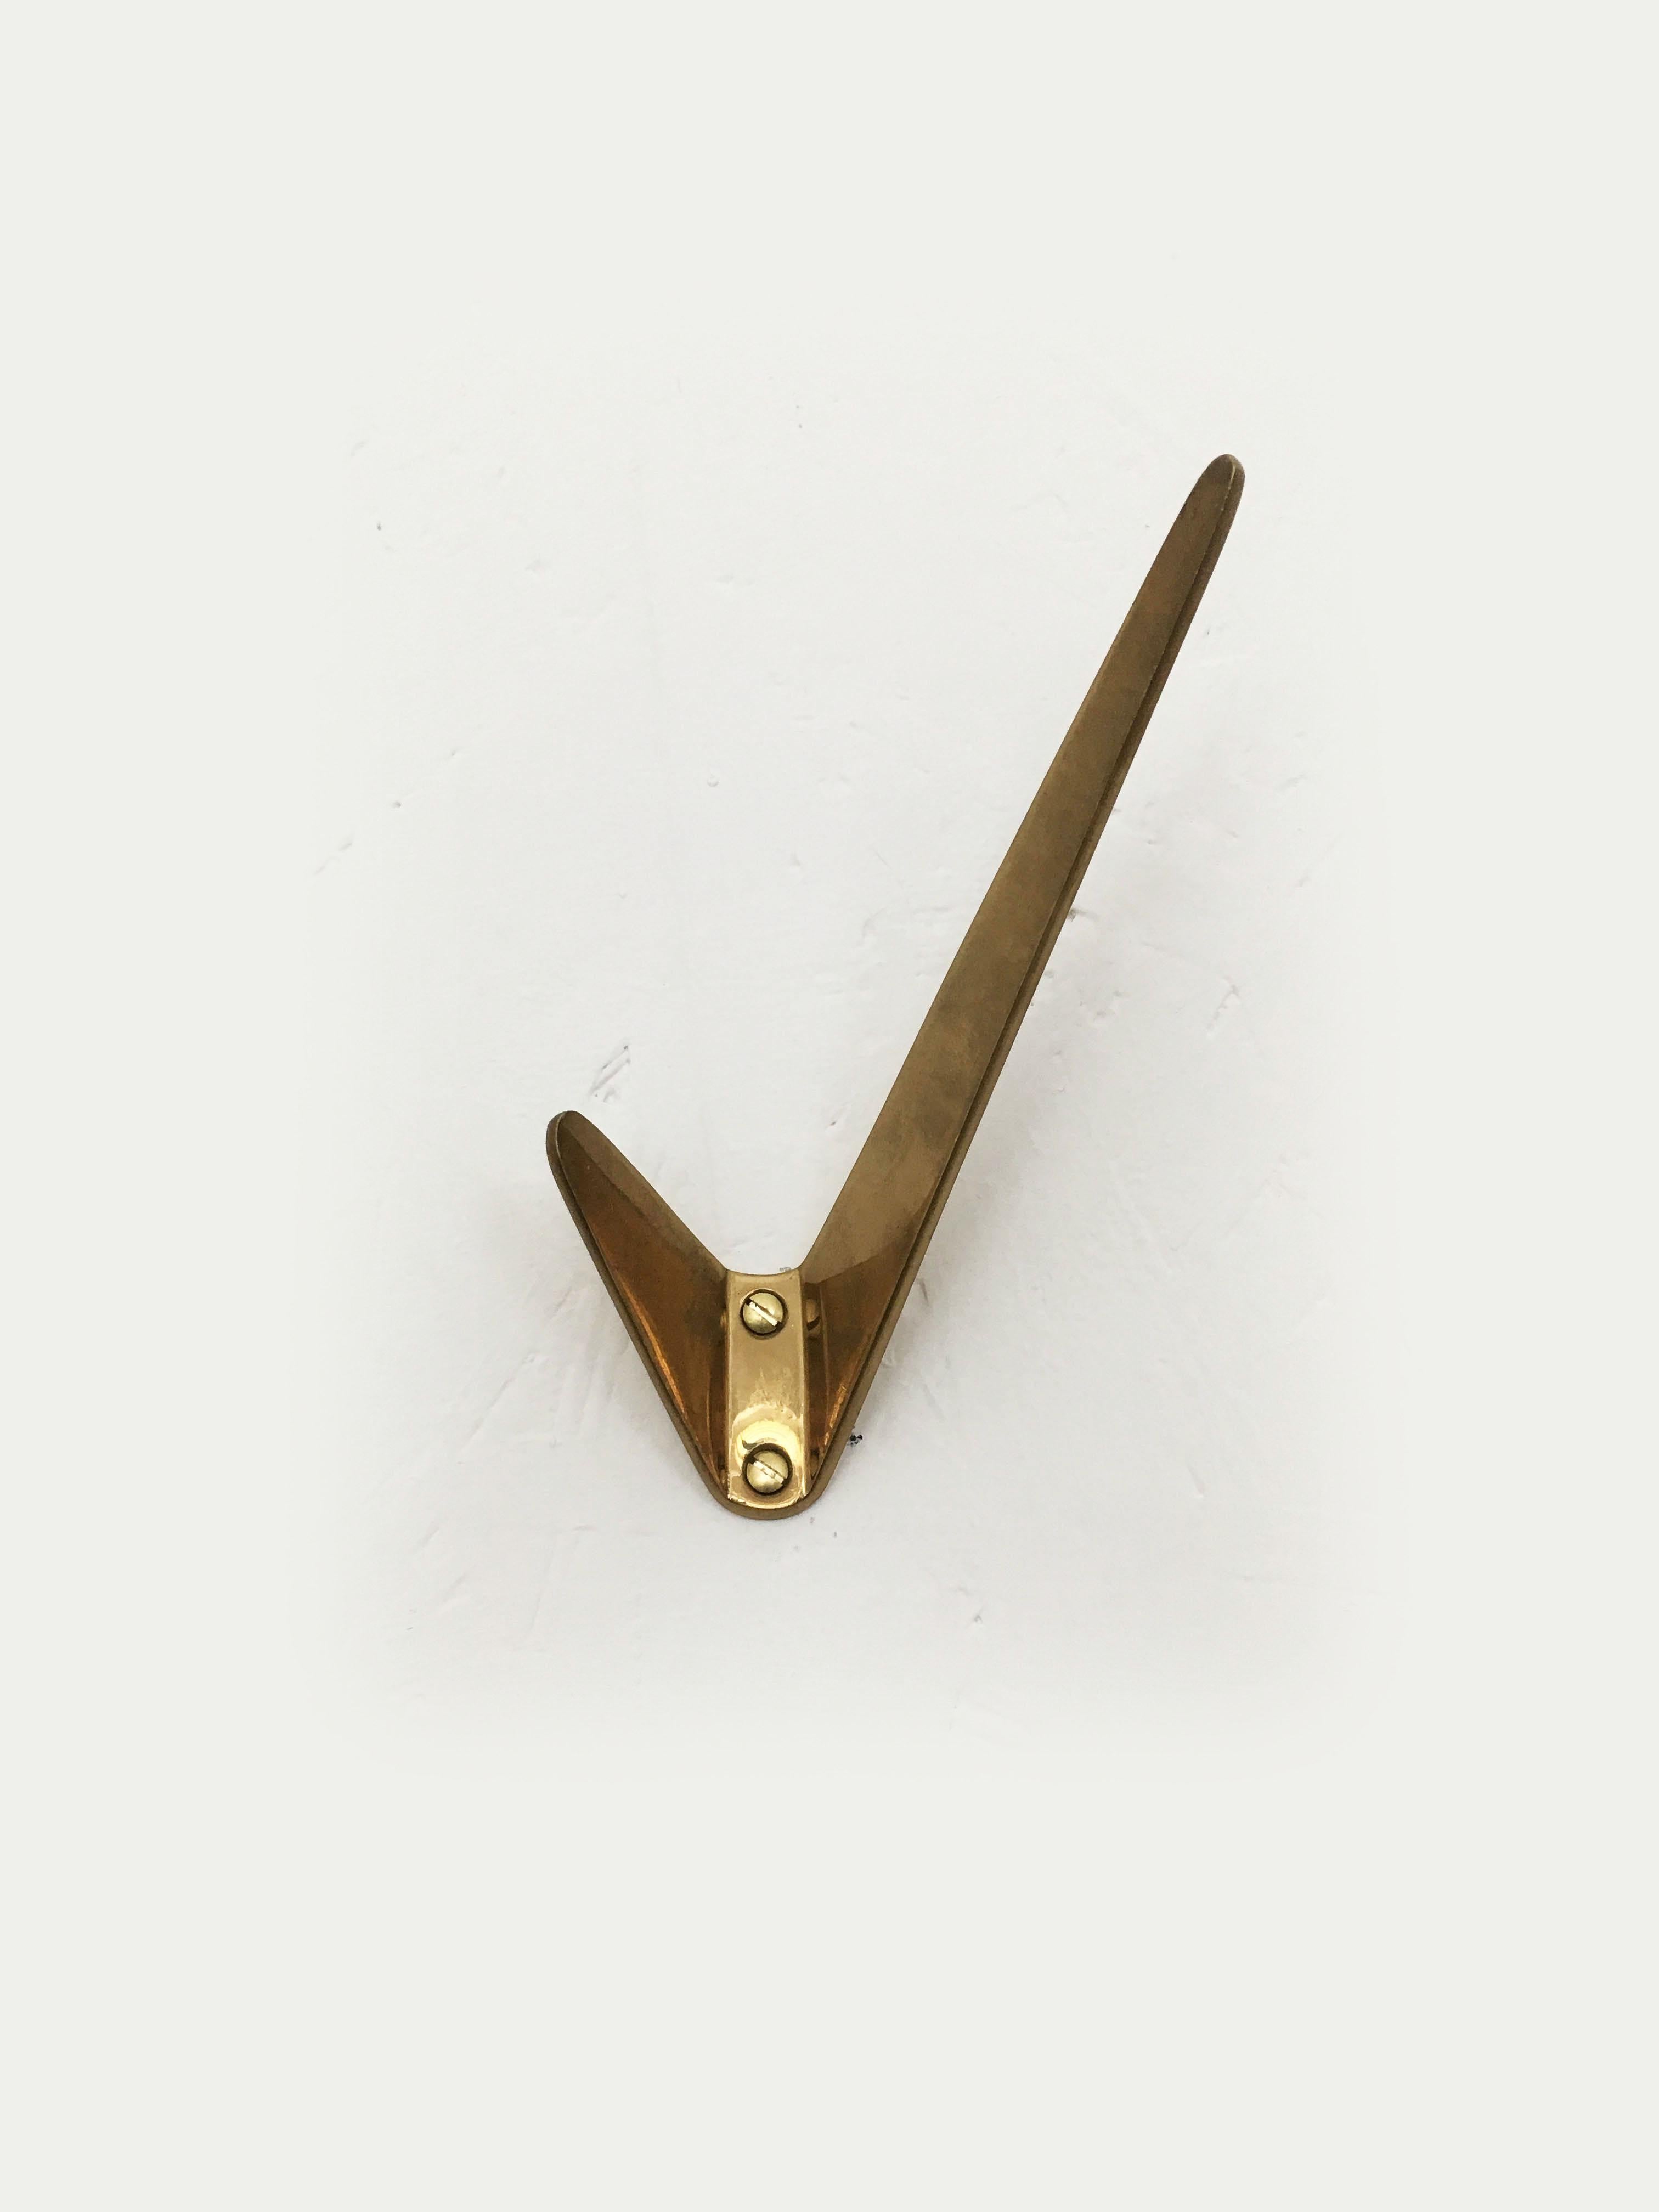 Hertha Baller Polished Brass Wall Hooks Model 'Neubau'. Beautiful Austrian modernist brass wall hooks, executed in the 1950s by Hertha Baller, Austria. Made of solid polished brass, in good condition with lovely patina. Sold and priced per piece. Up